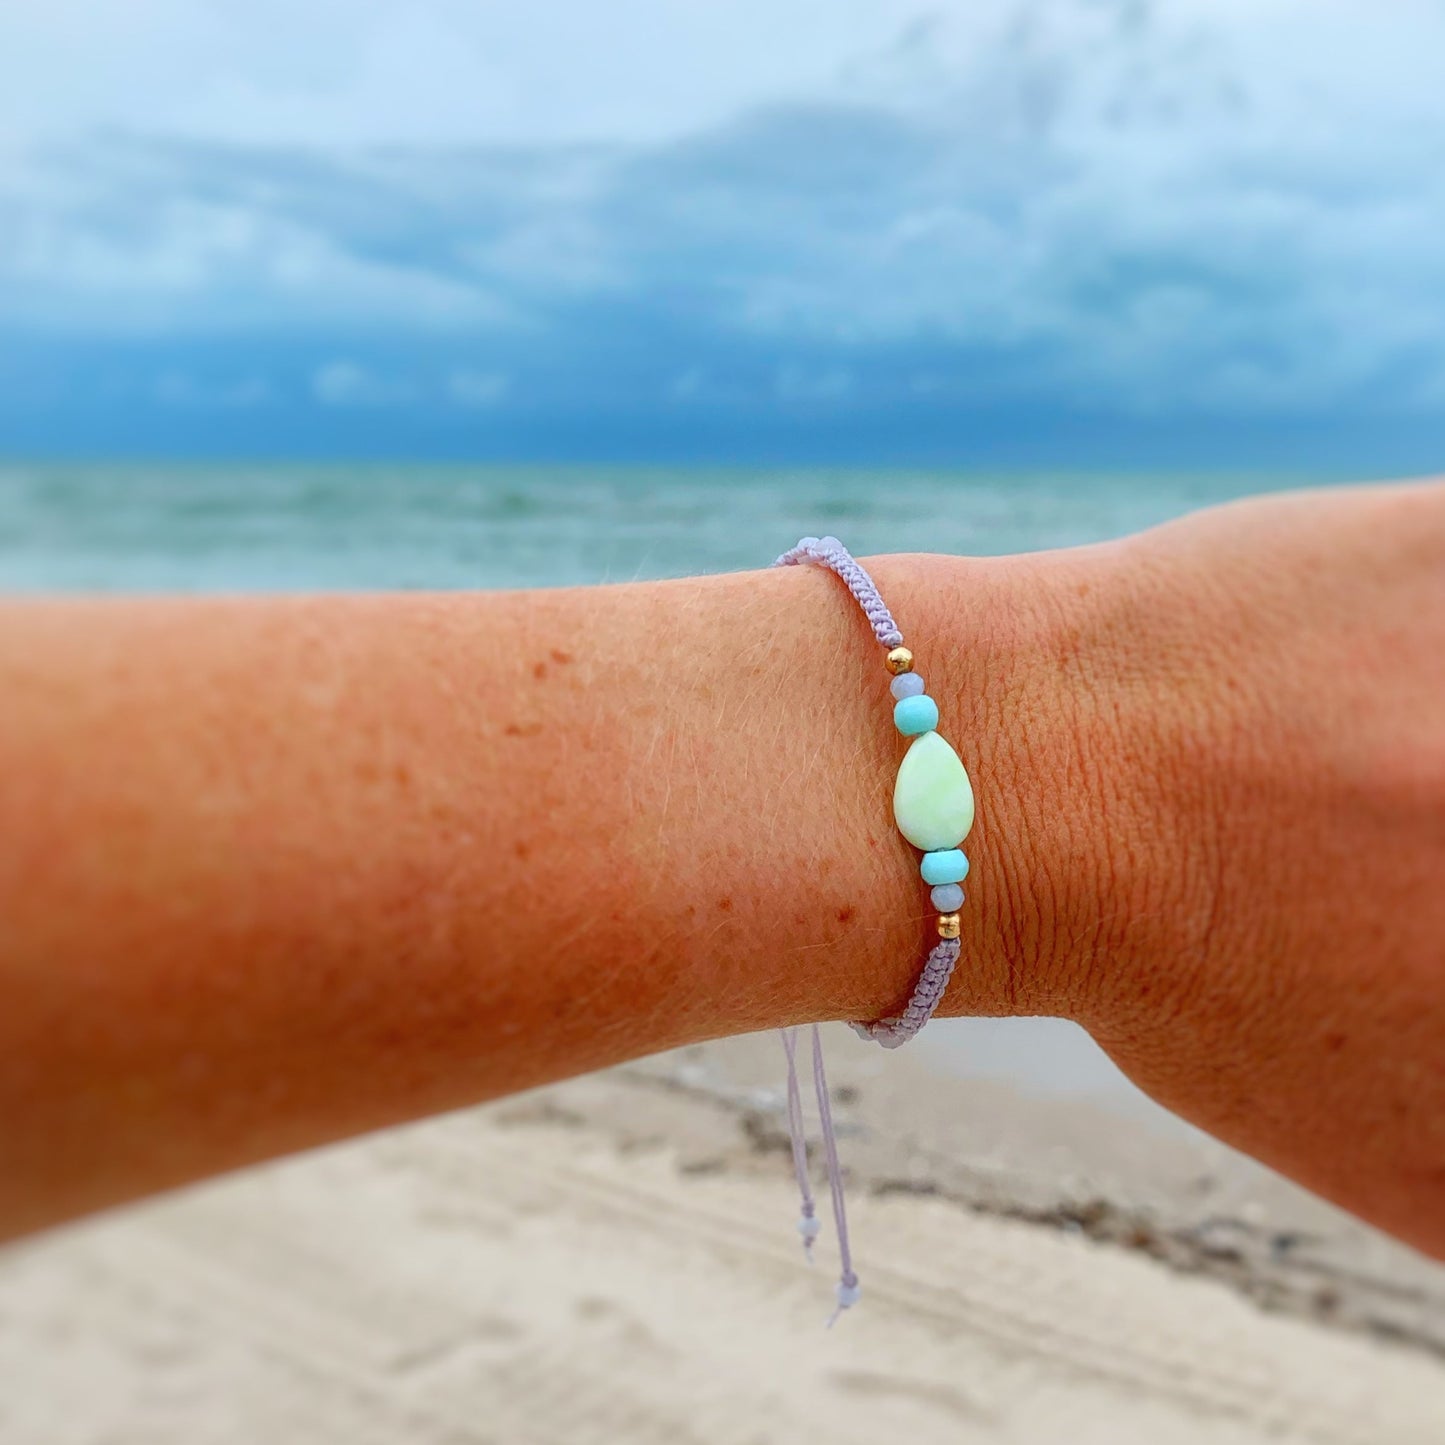 the captiva bracelet in coastal haze by mermaidsand madeleines is a macrame bracelet created with a lime jade teardrop bead at the center with semiprecious and 14k gold beads on either side with lavender color cord. this bracelet is photographed on a wrist with beach scenery in the background